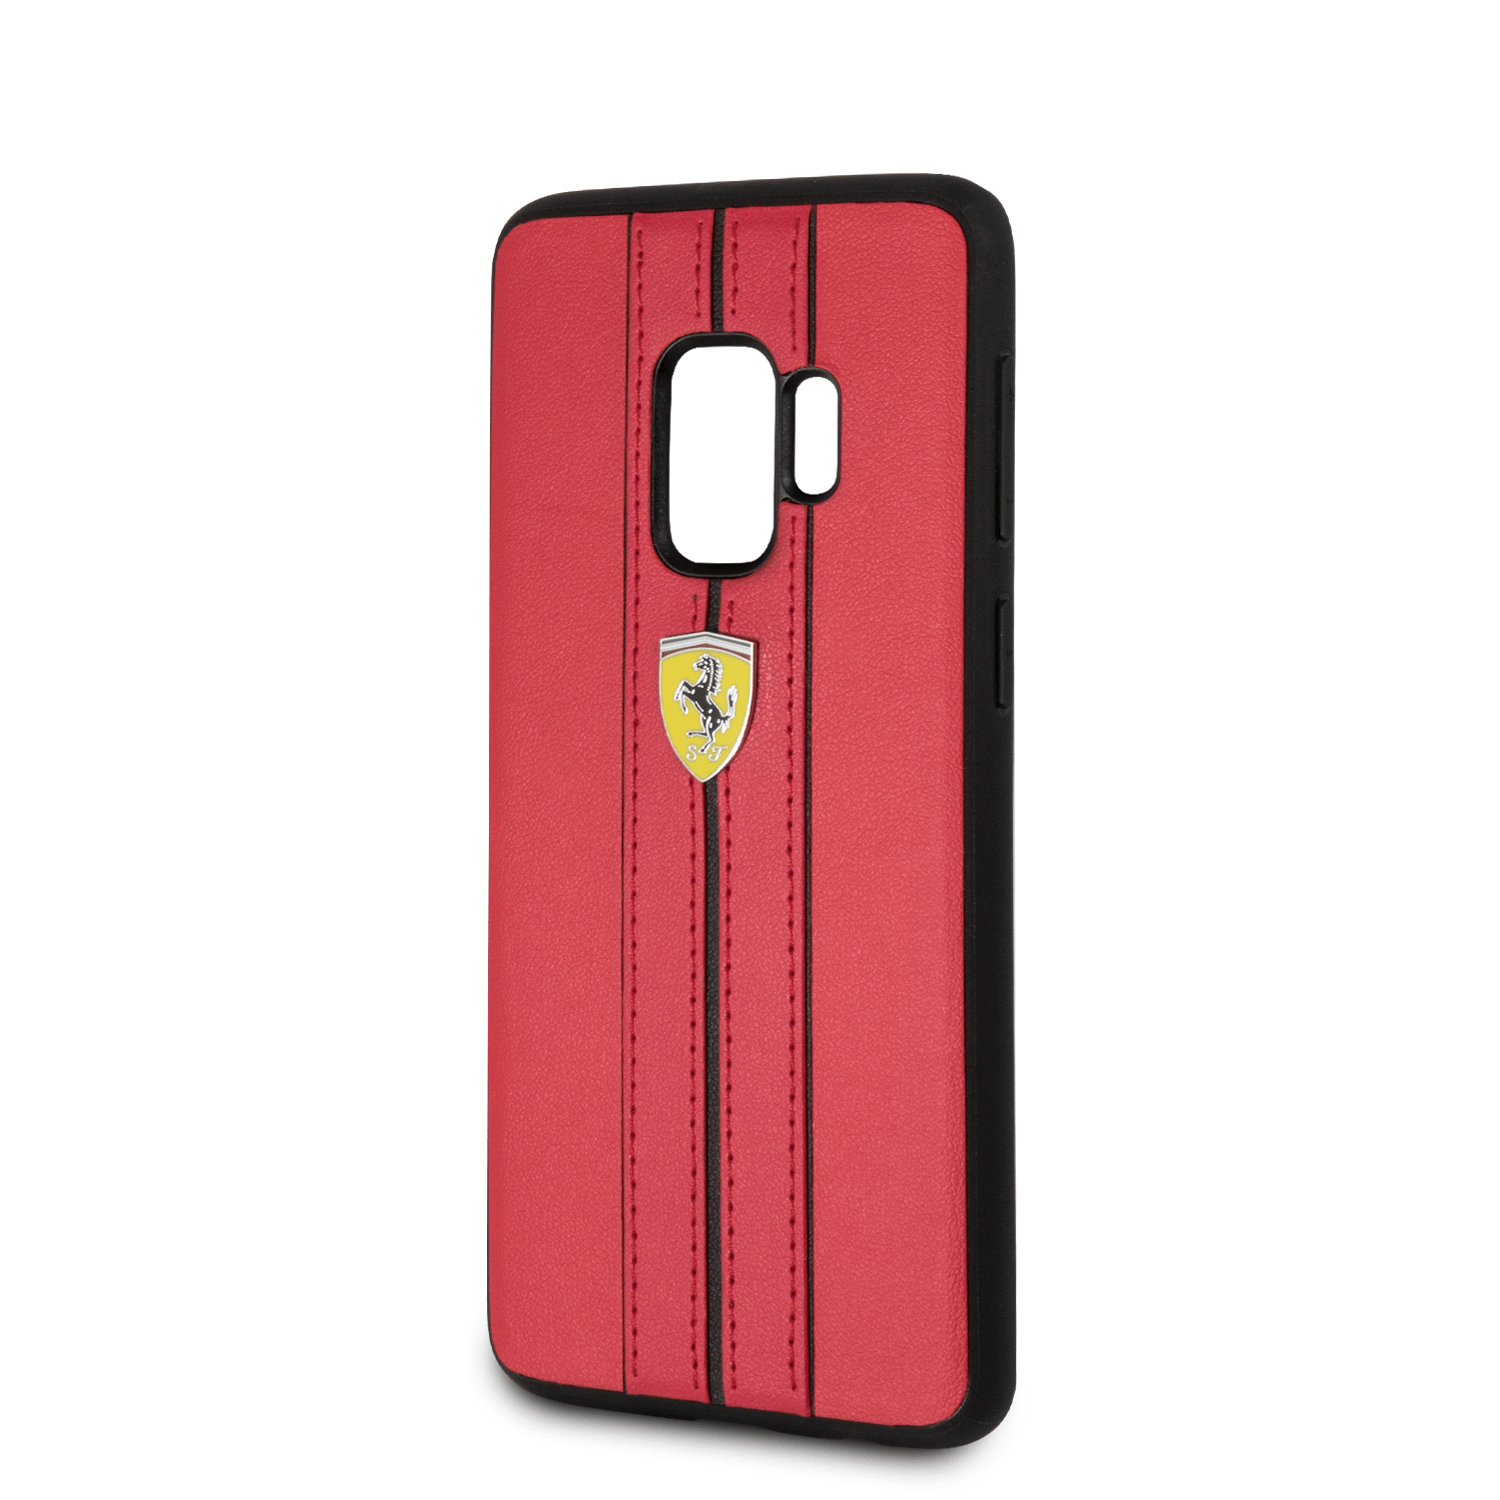 The unique quilted saddlery finish enhances the look and feel of this high-quality device case